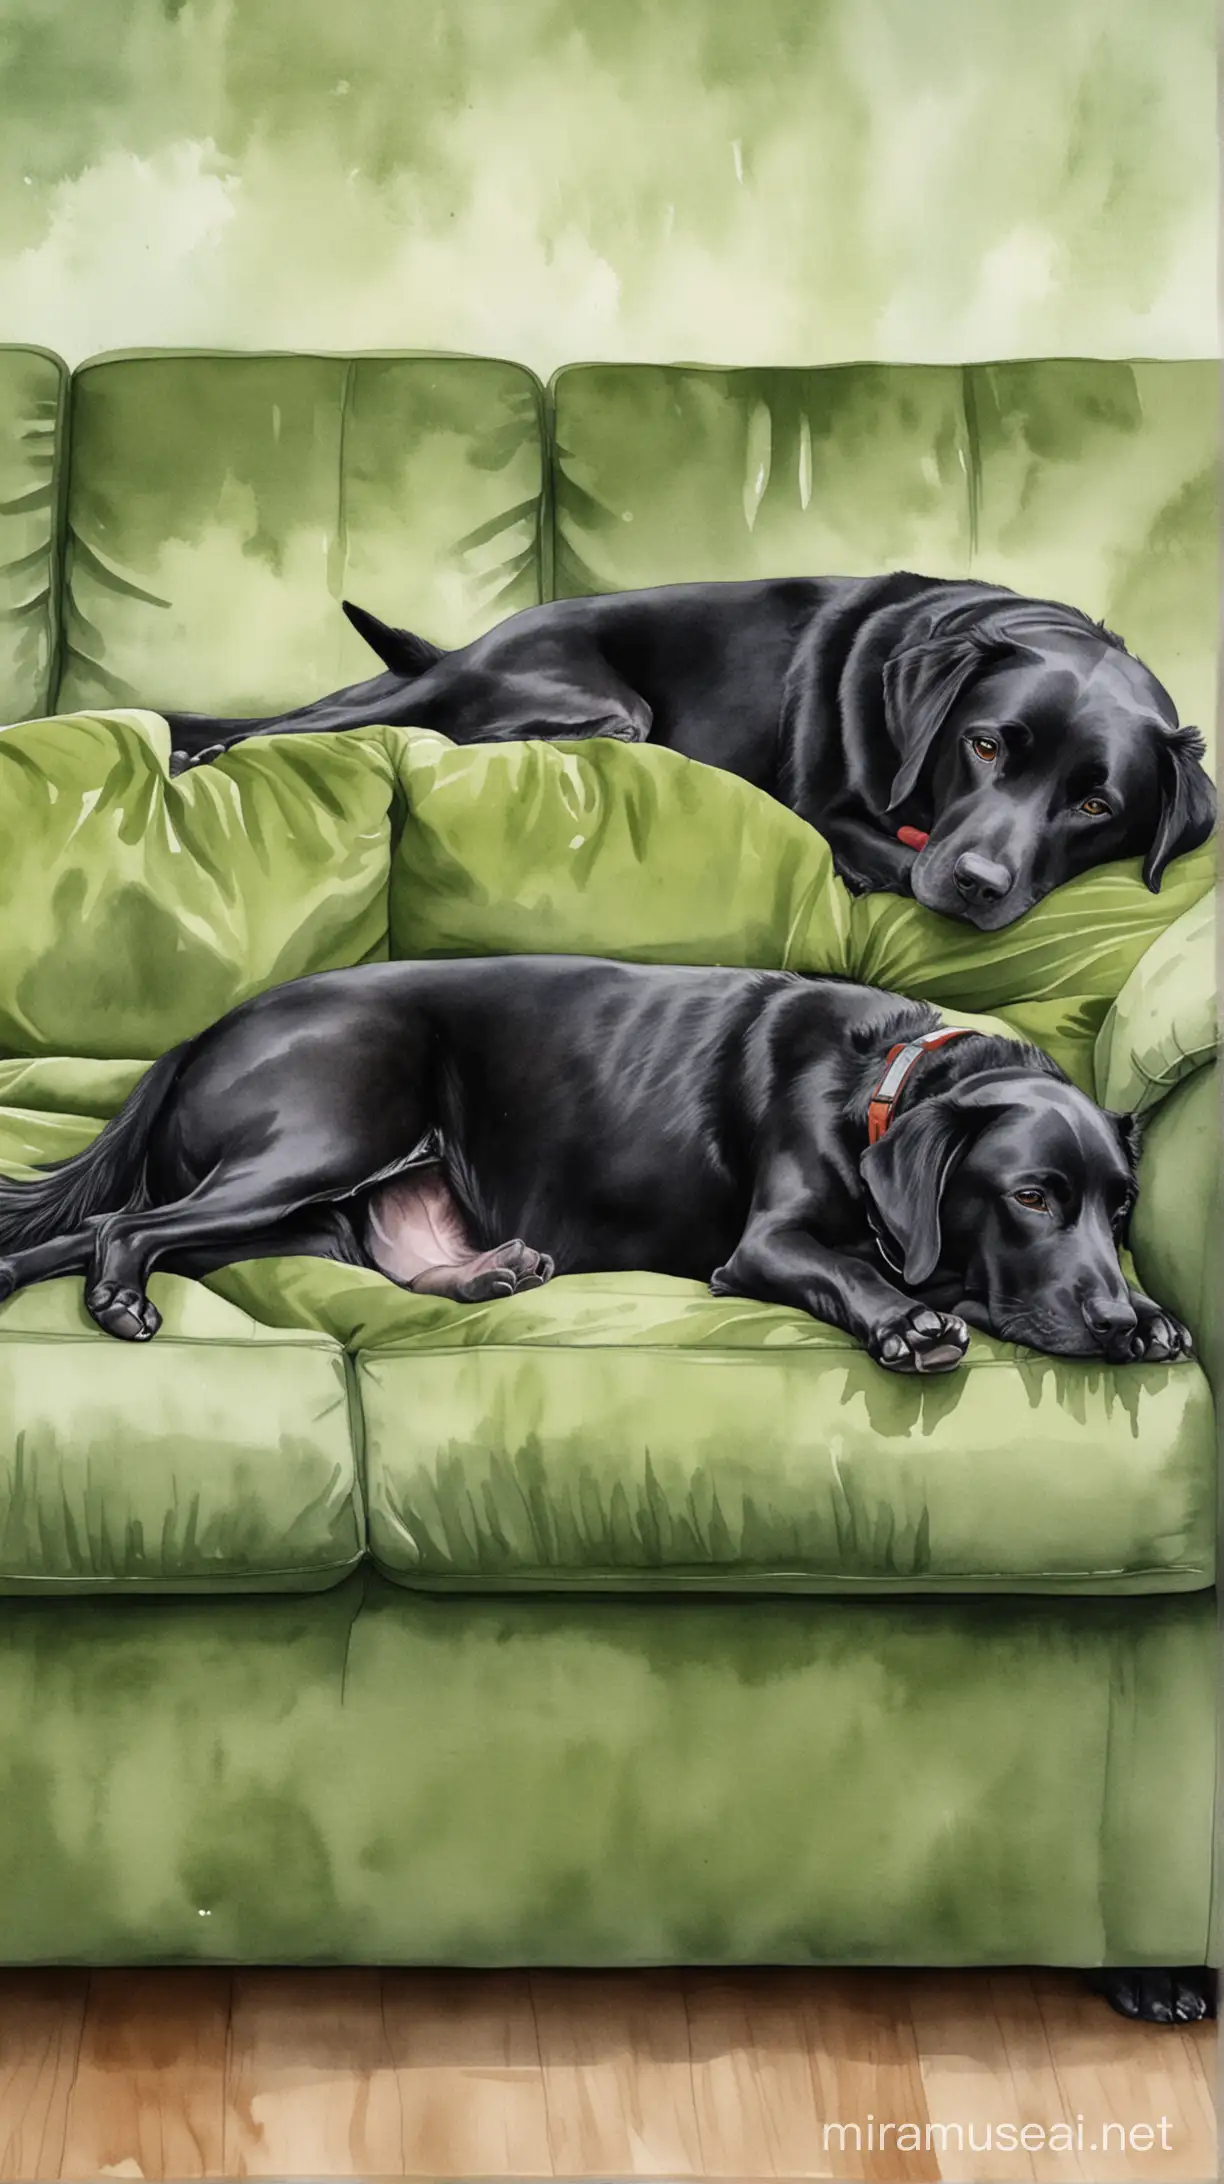 Peaceful Black Labrador Dog Sleeping on Olive Green Couch Watercolor